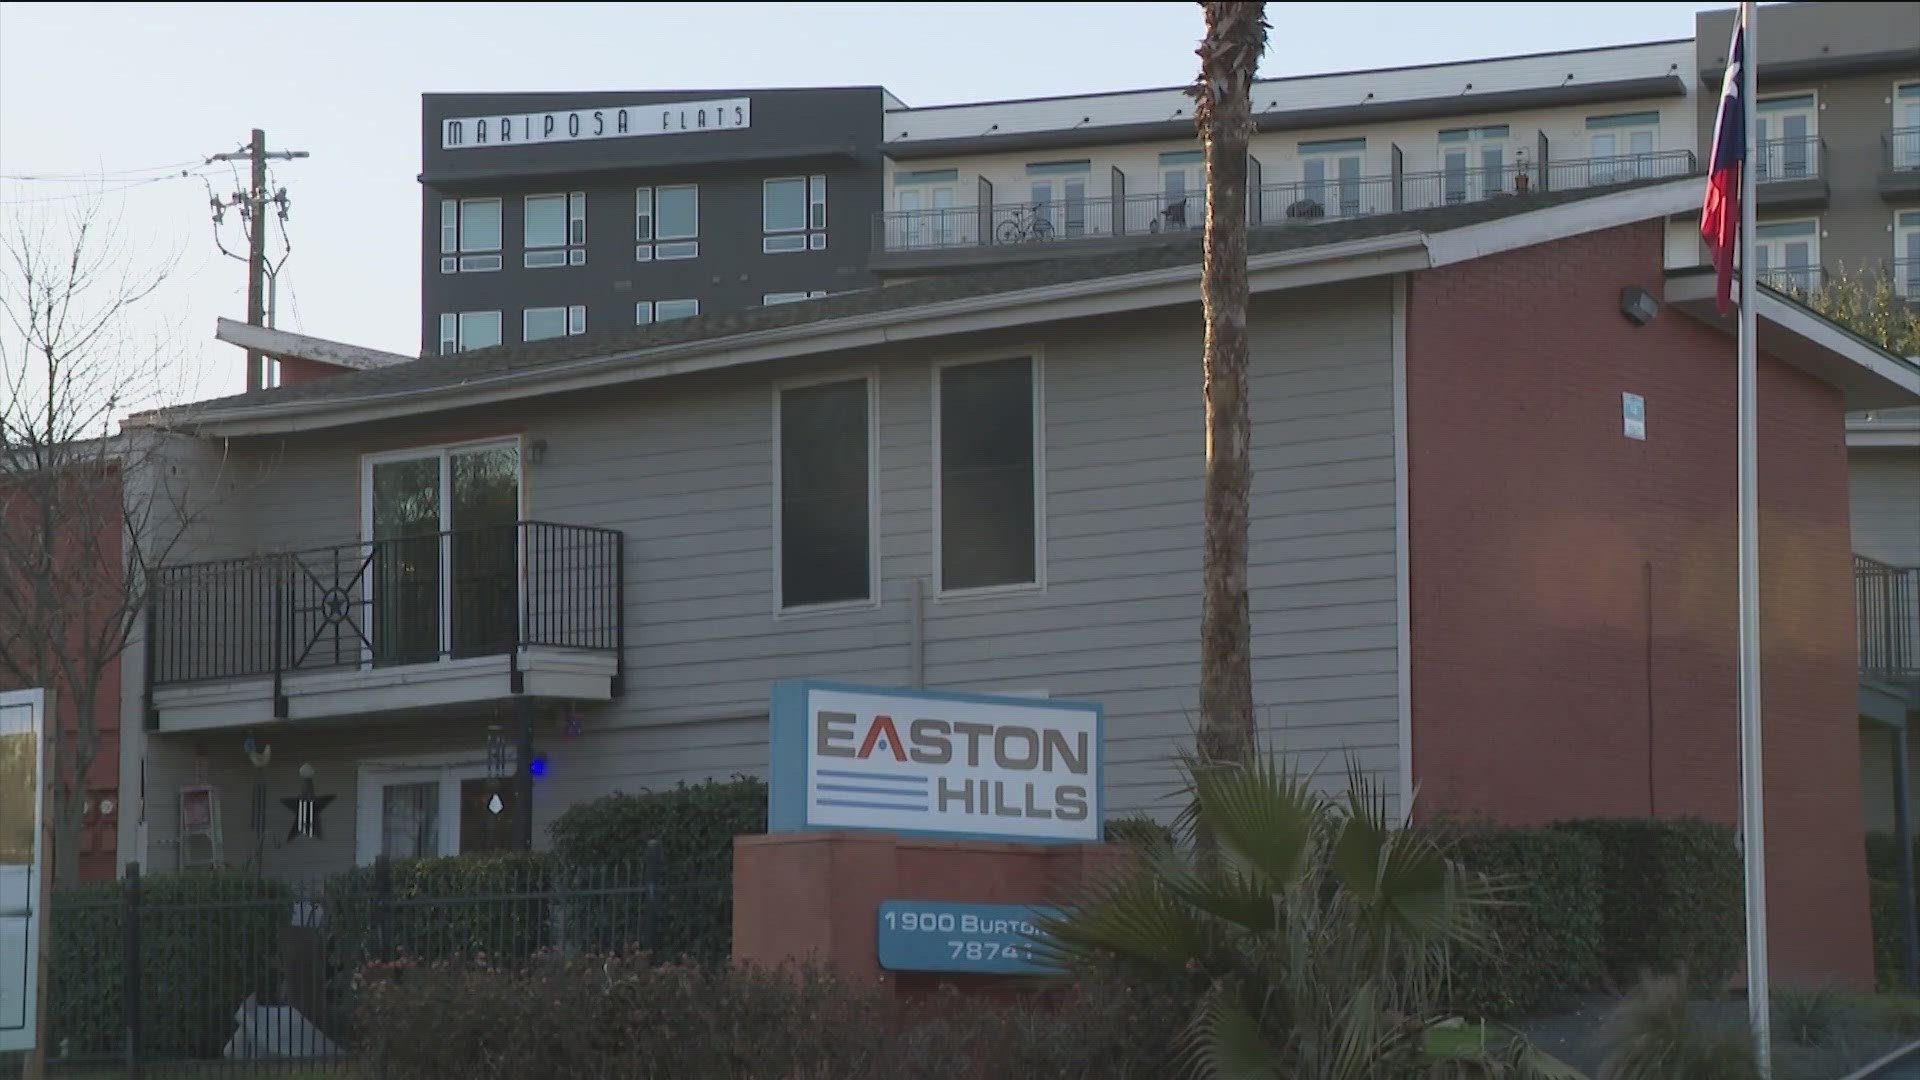 The property owners of Easton Hills wants to revamp the site into a vertical mixed-use development.